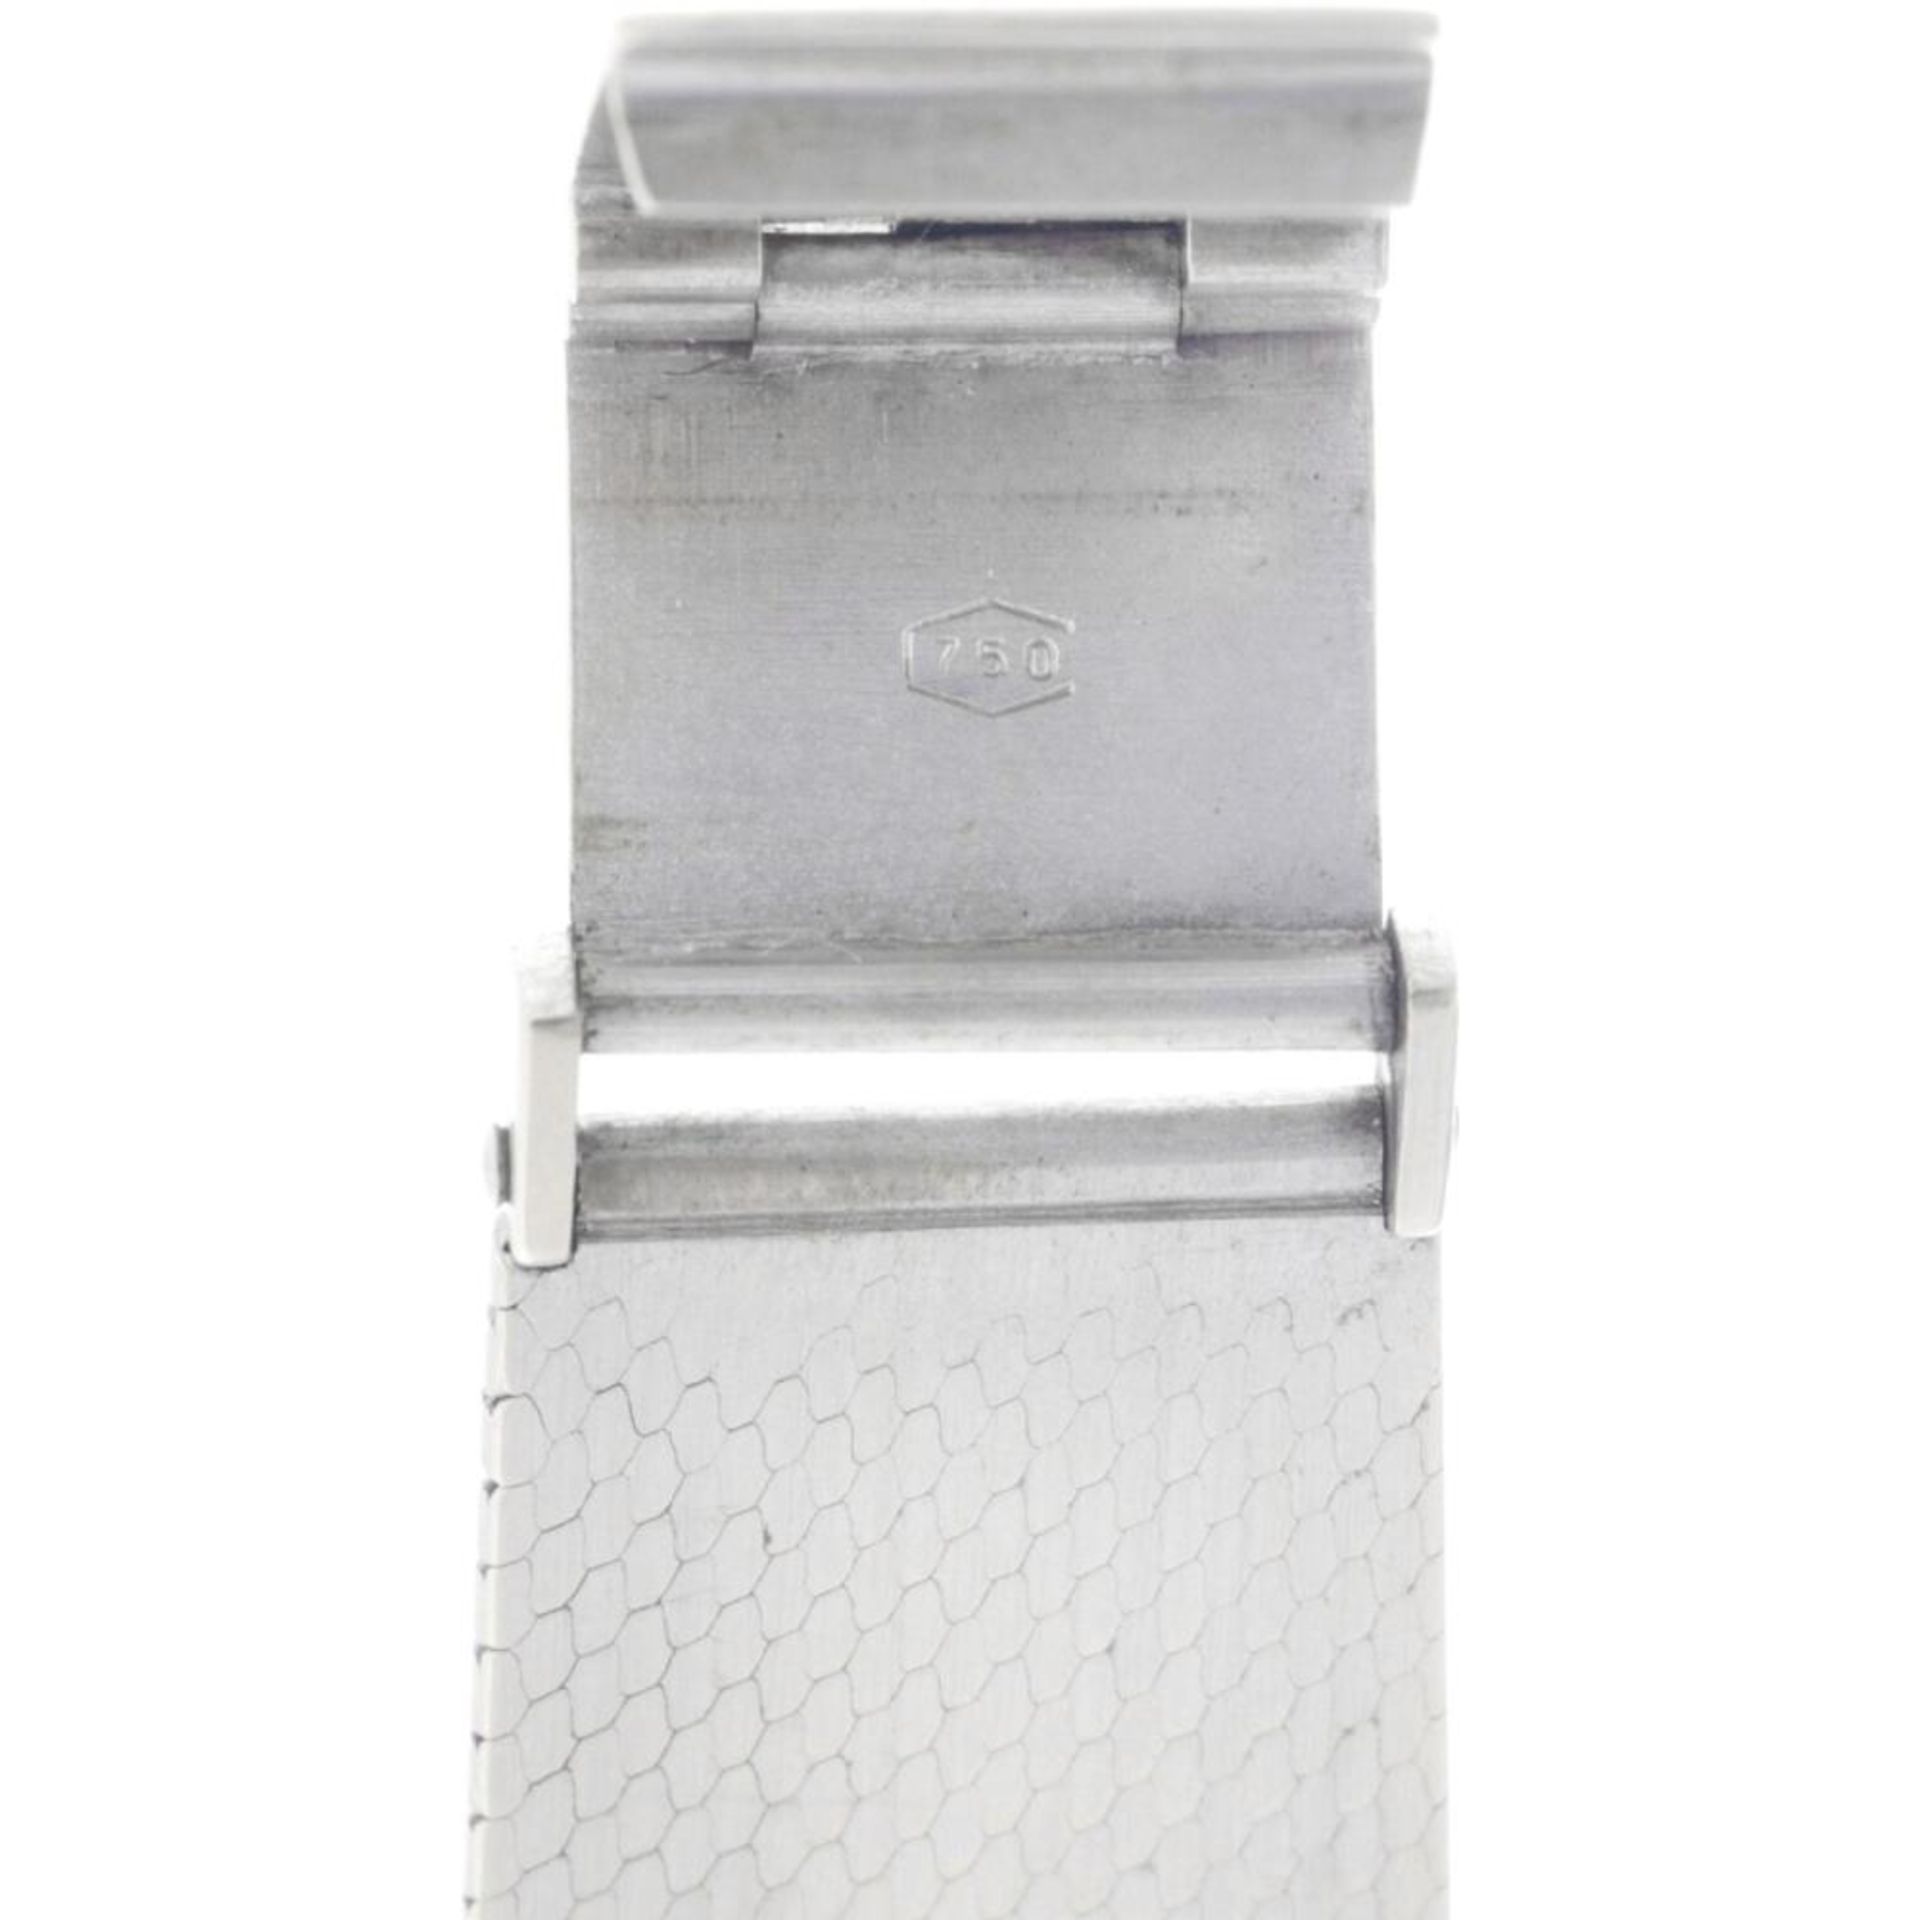 Omega white gold - Men's watch - ca. 1960. - Image 6 of 6